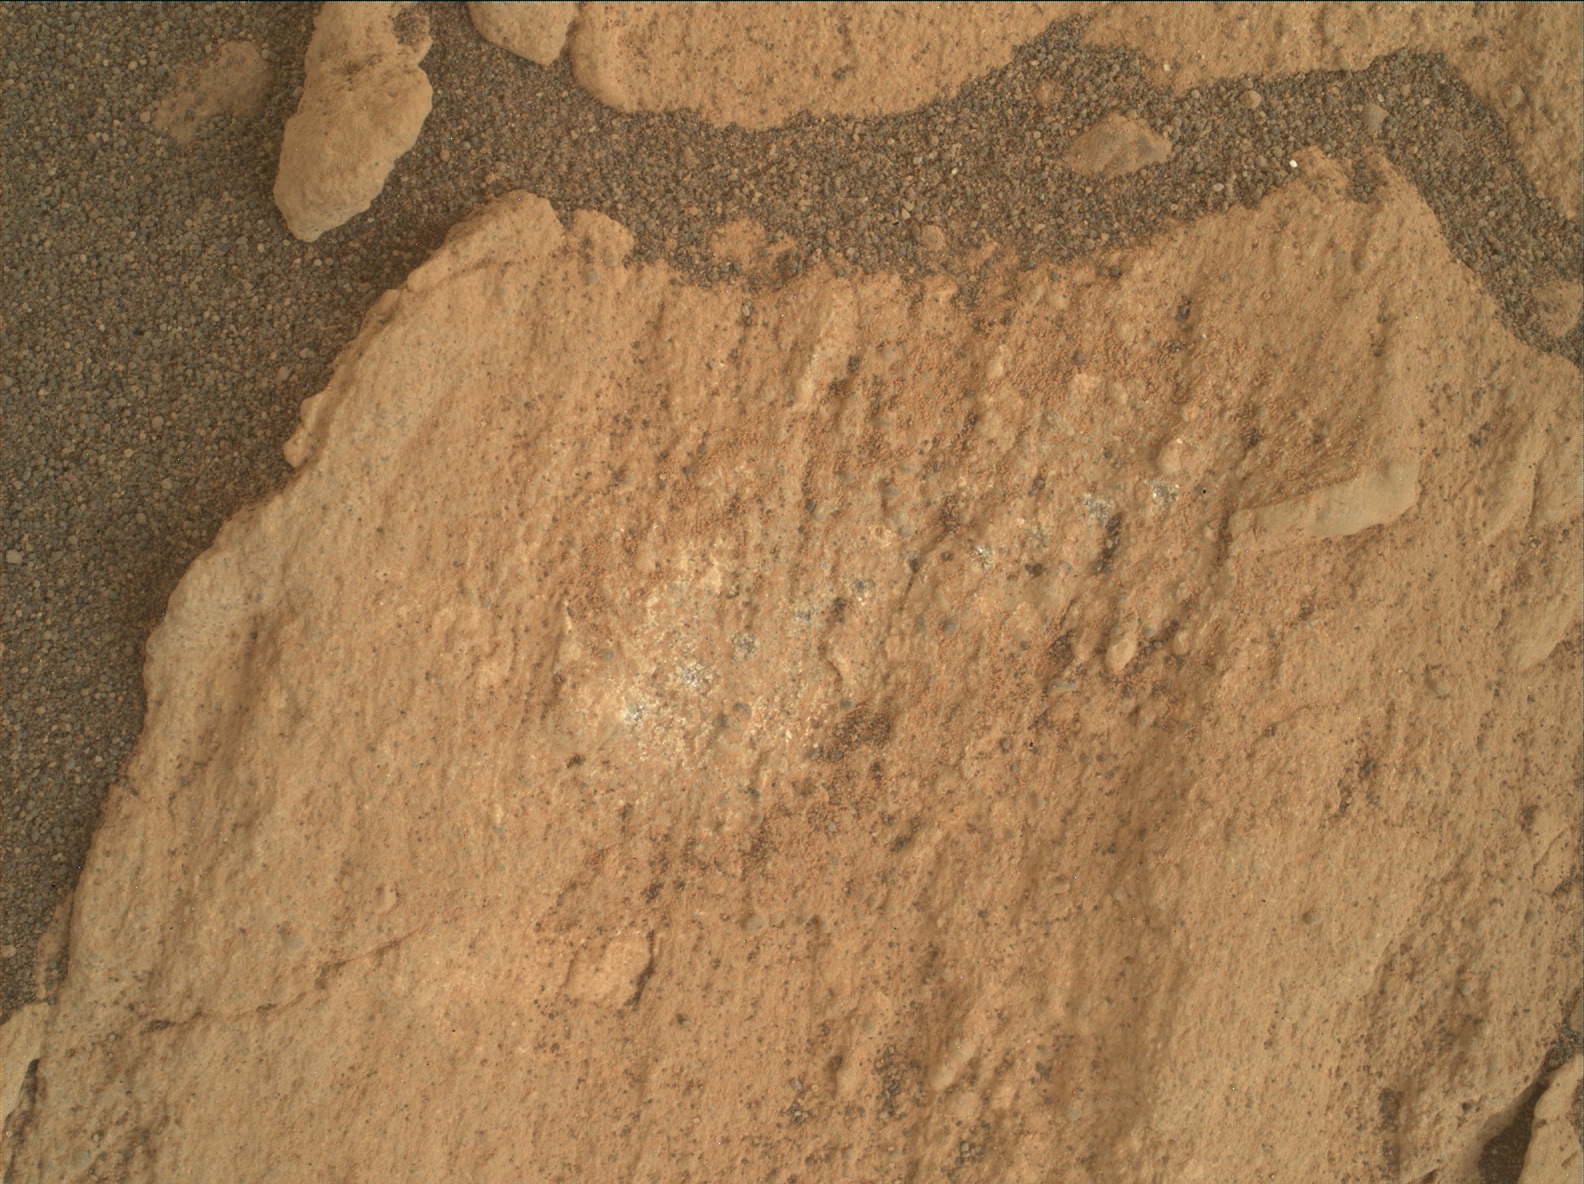 Nasa's Mars rover Curiosity acquired this image using its Mars Hand Lens Imager (MAHLI) on Sol 2695